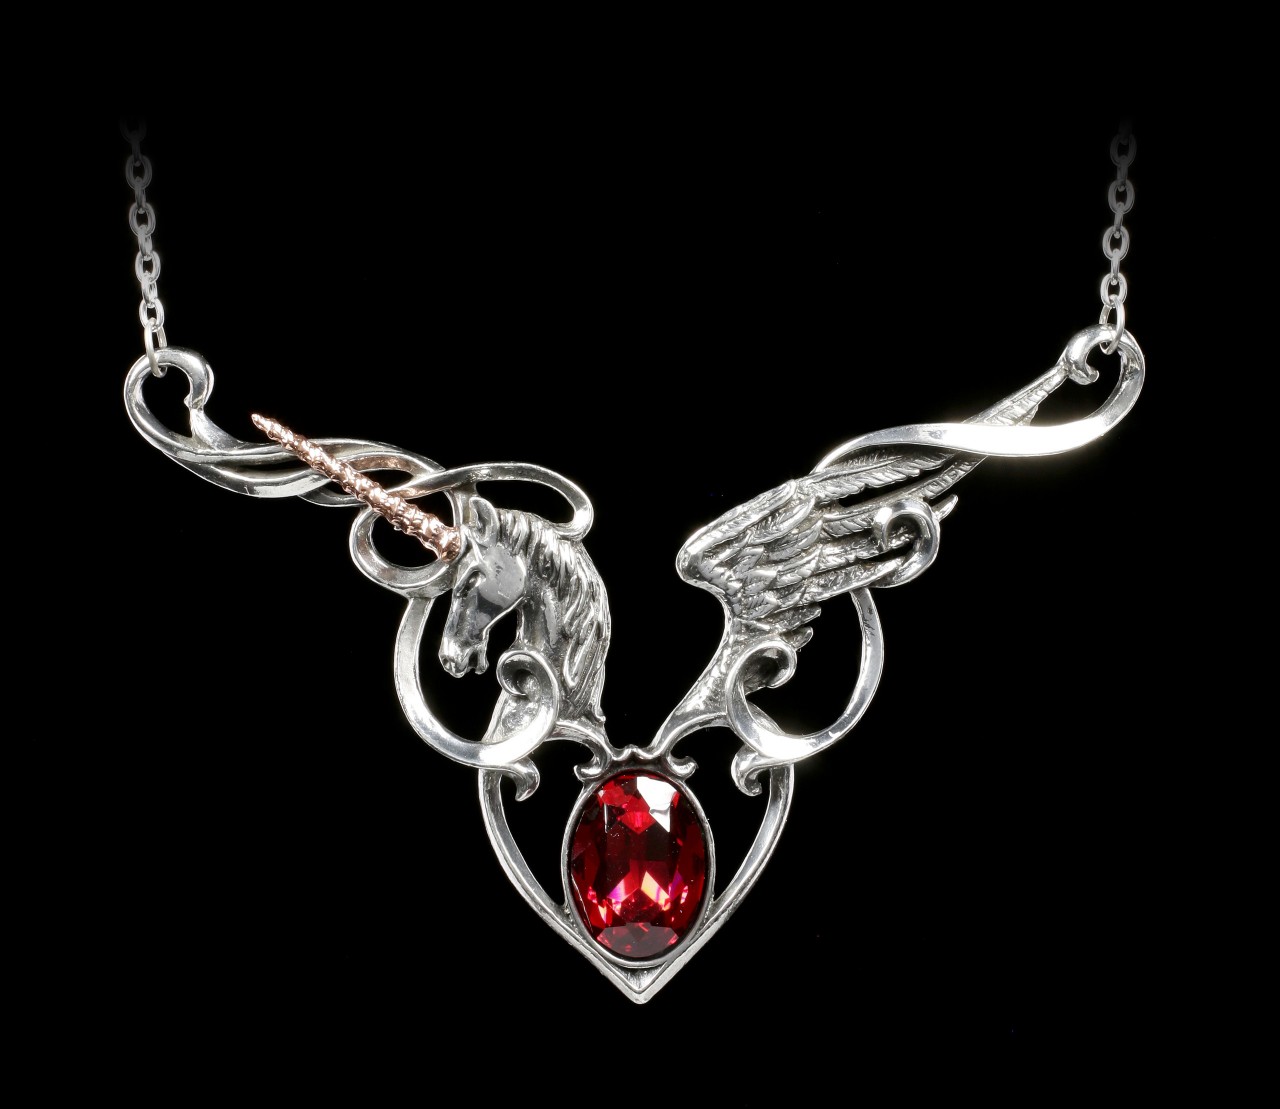 Alchemy Gothic Necklace - The Maiden's Conquest